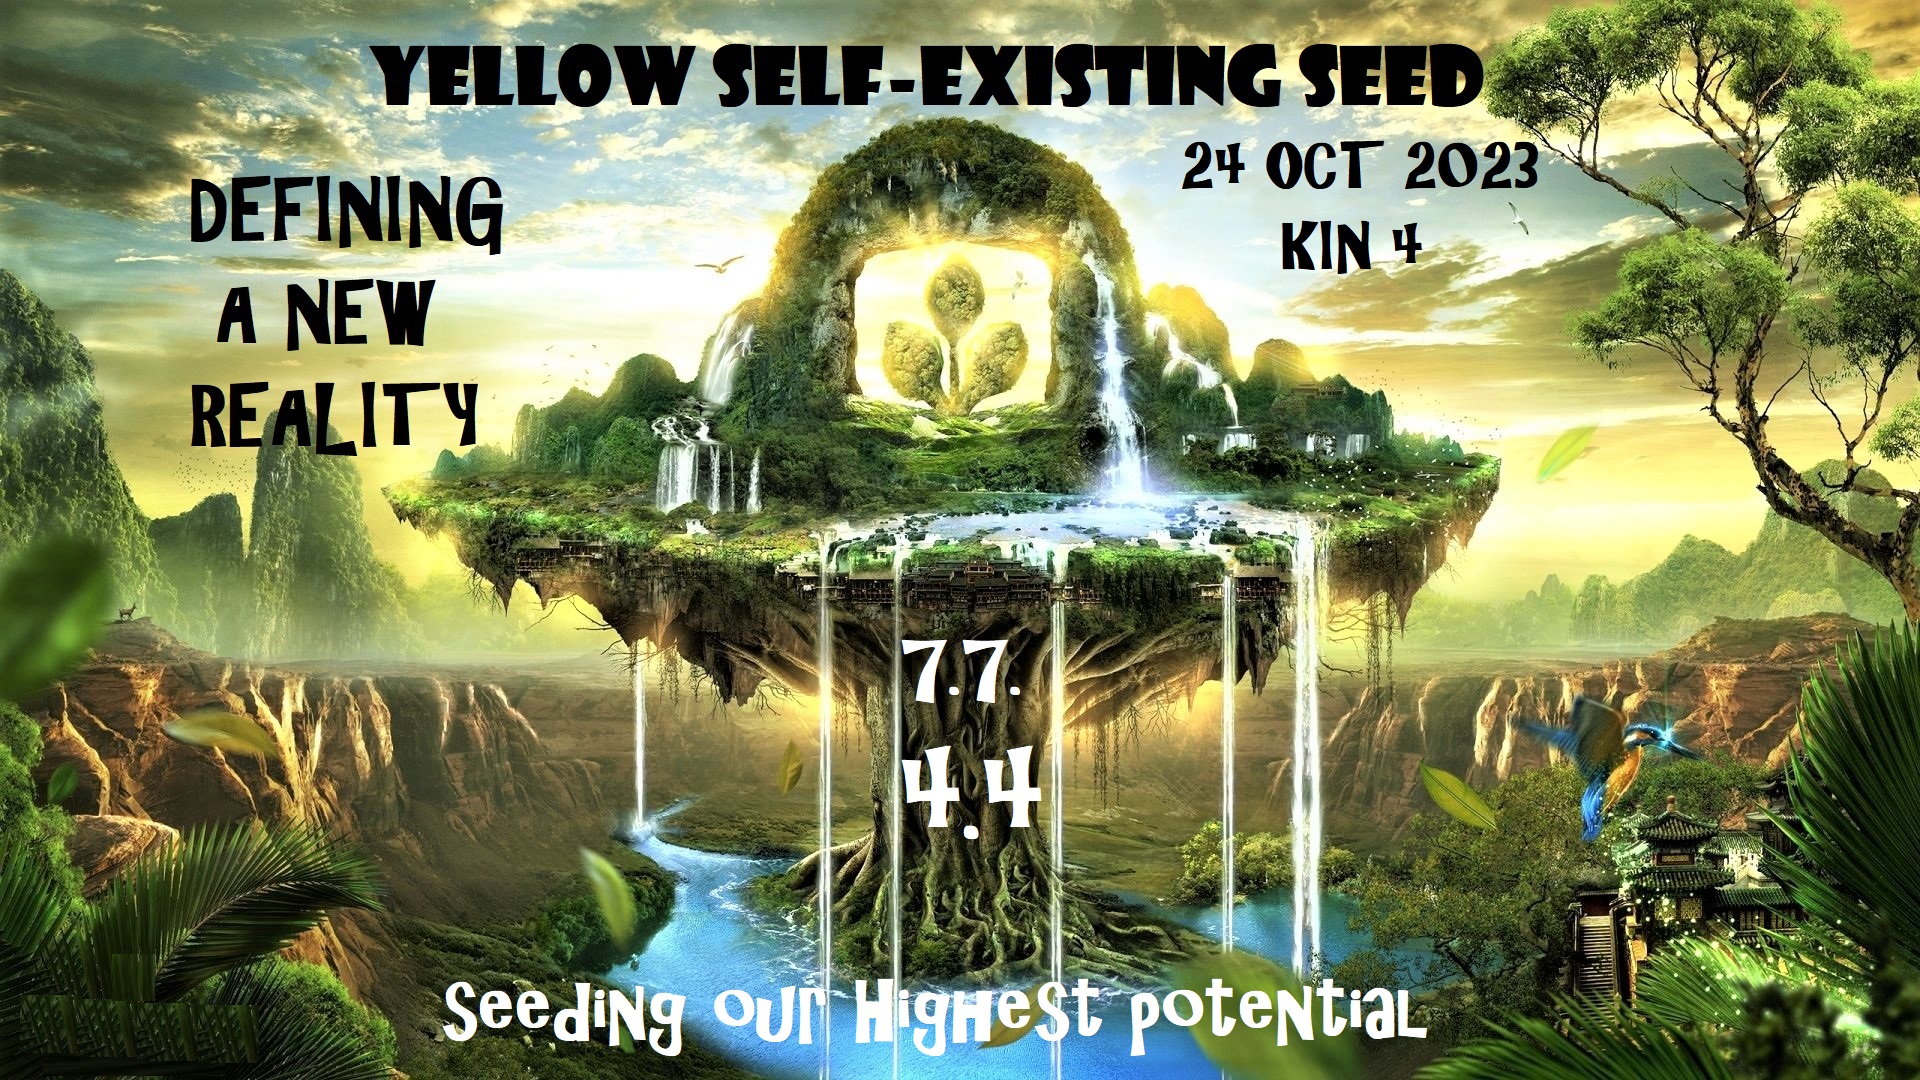 YELLOW SELF-EXISTING SEED